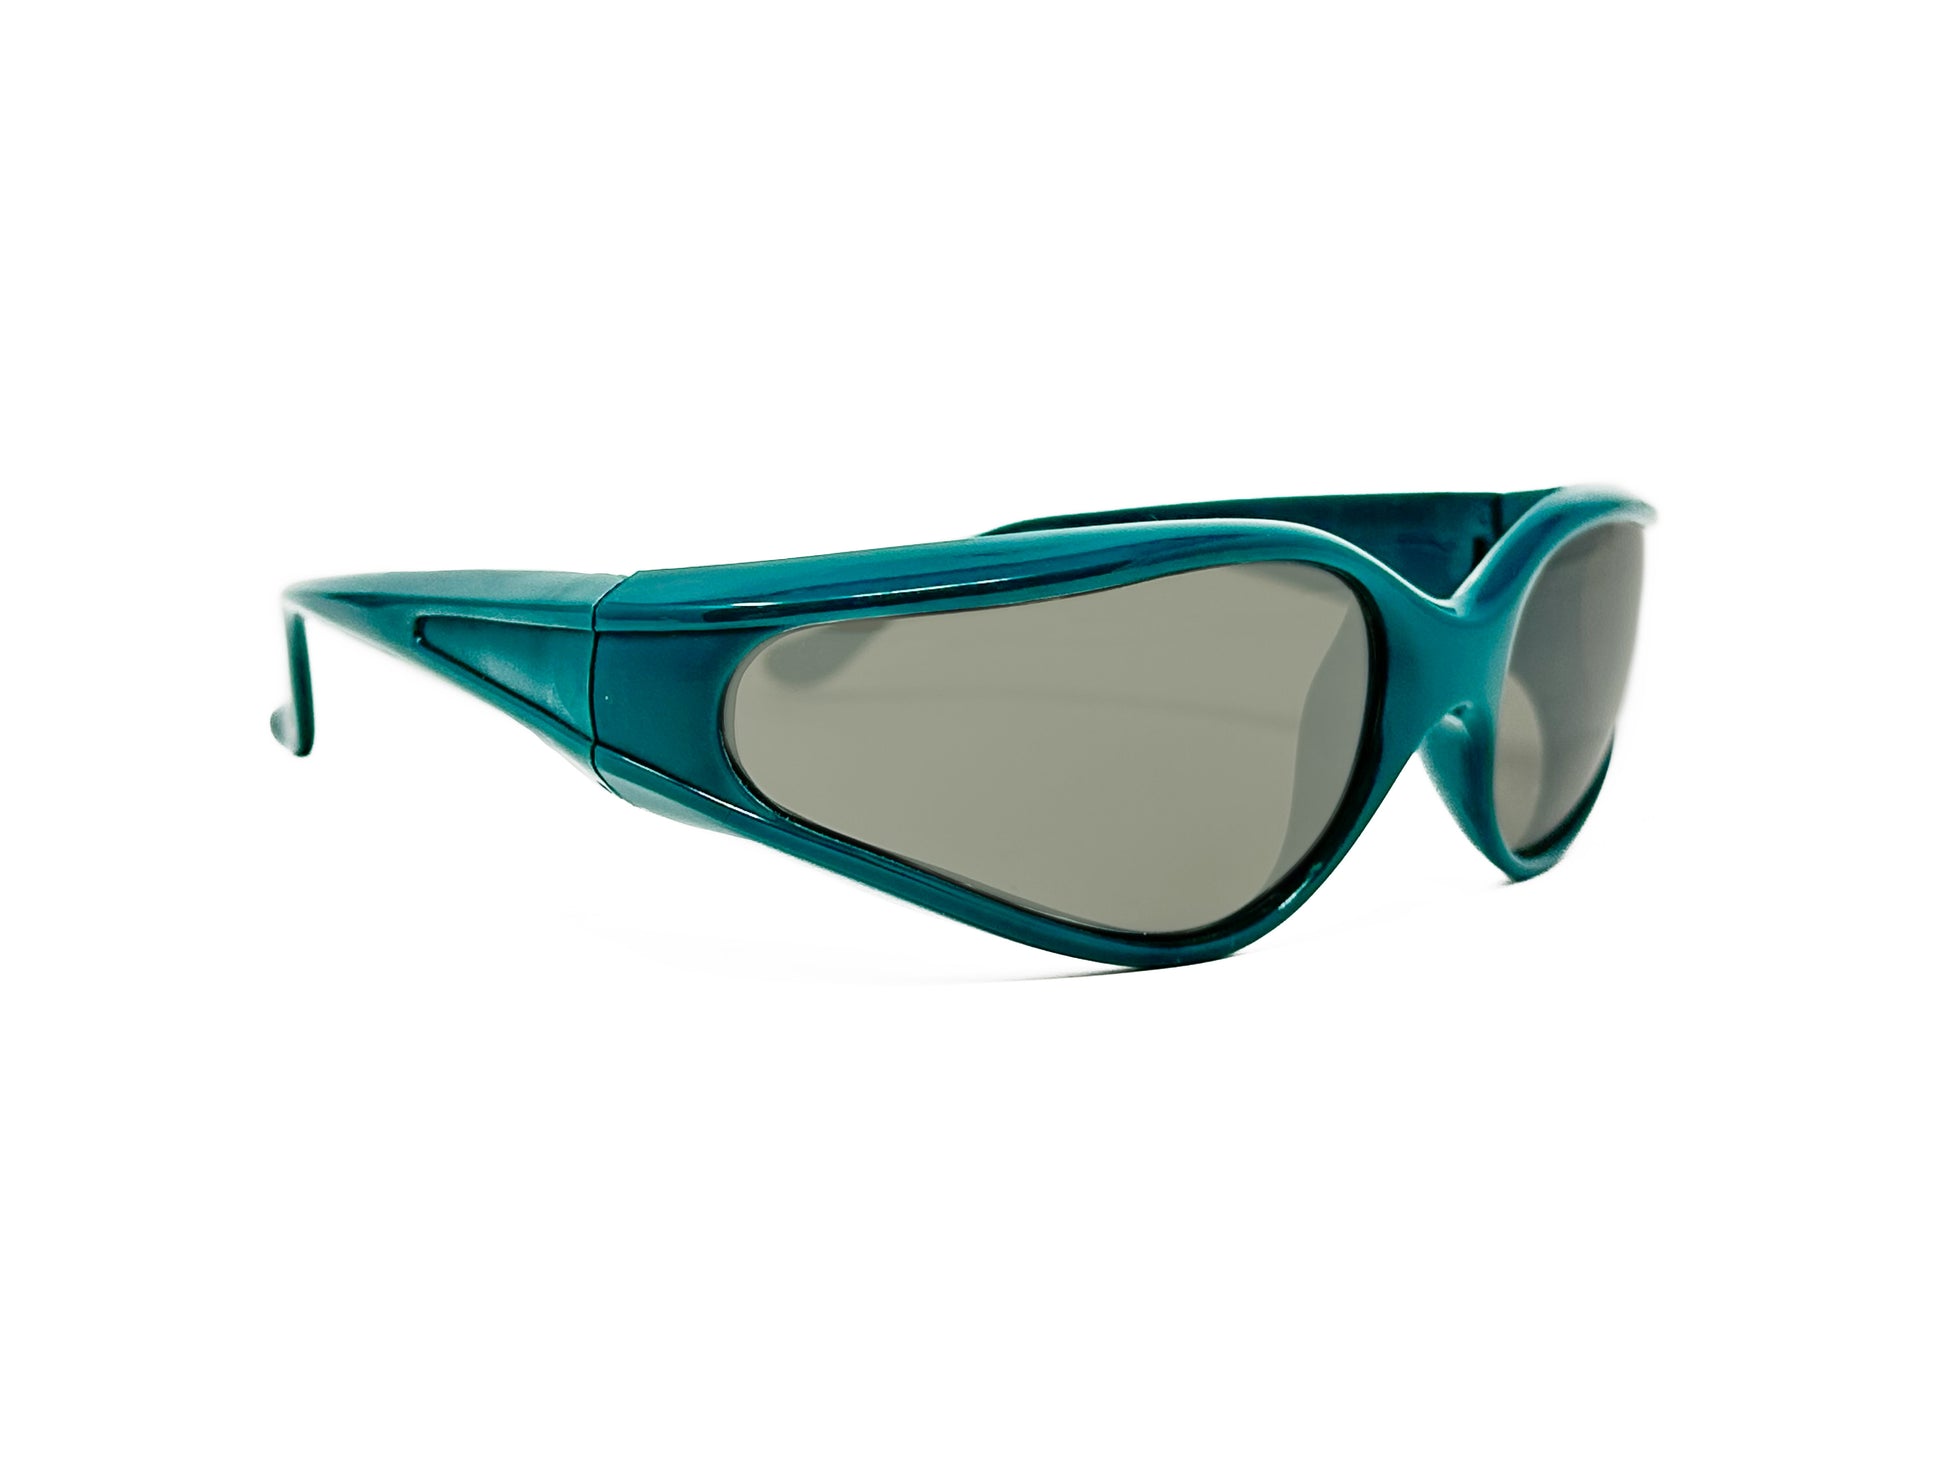 Belle sideways tear-drop shaped sunglass with acetate frame. Model: Mad Cat. Color: 731 Teal . Side view.